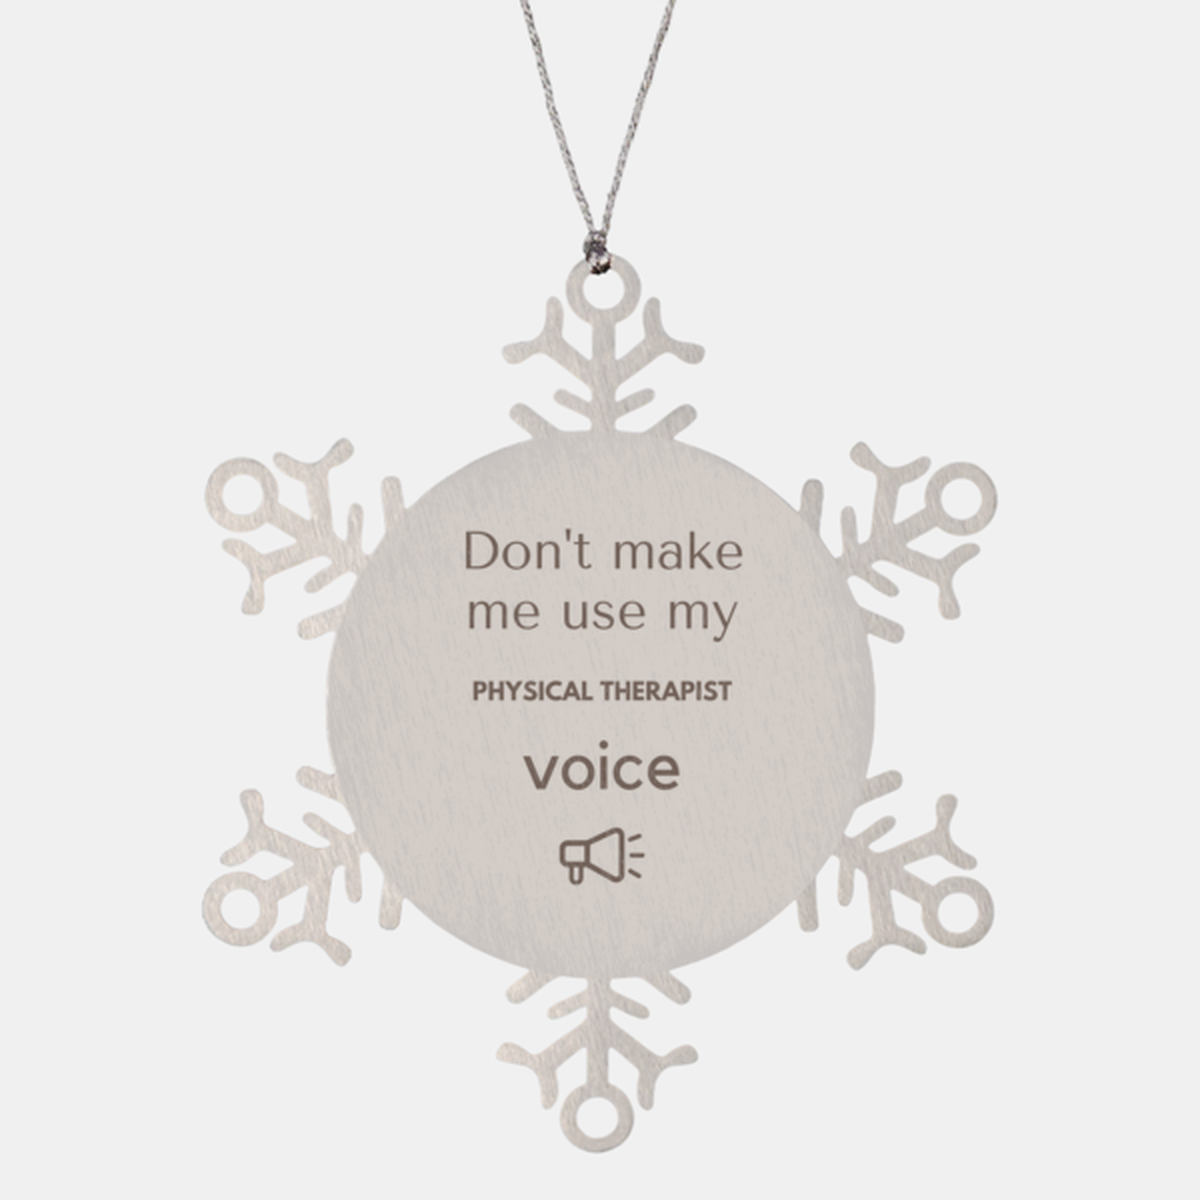 Don't make me use my Physical Therapist voice, Sarcasm Physical Therapist Ornament Gifts, Christmas Physical Therapist Snowflake Ornament Unique Gifts For Physical Therapist Coworkers, Men, Women, Colleague, Friends